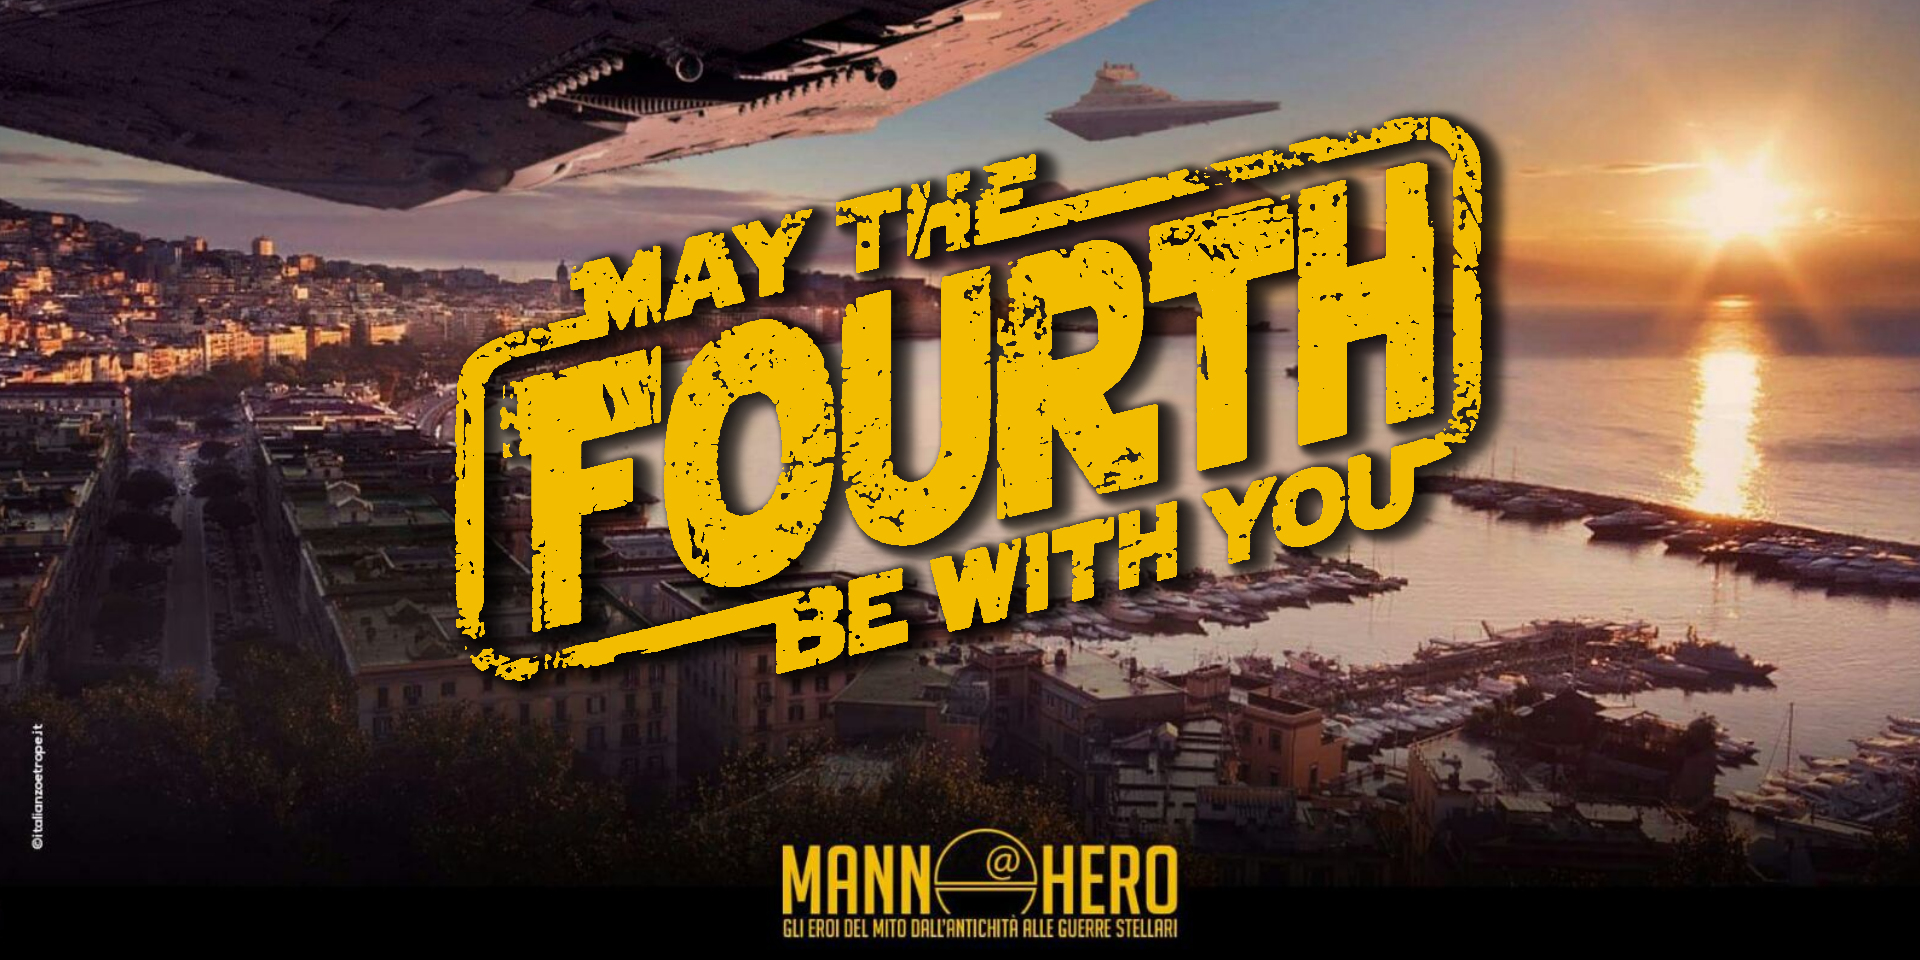 May the fourth be with you! Napoli e Caserta 4-6 Maggio 2018